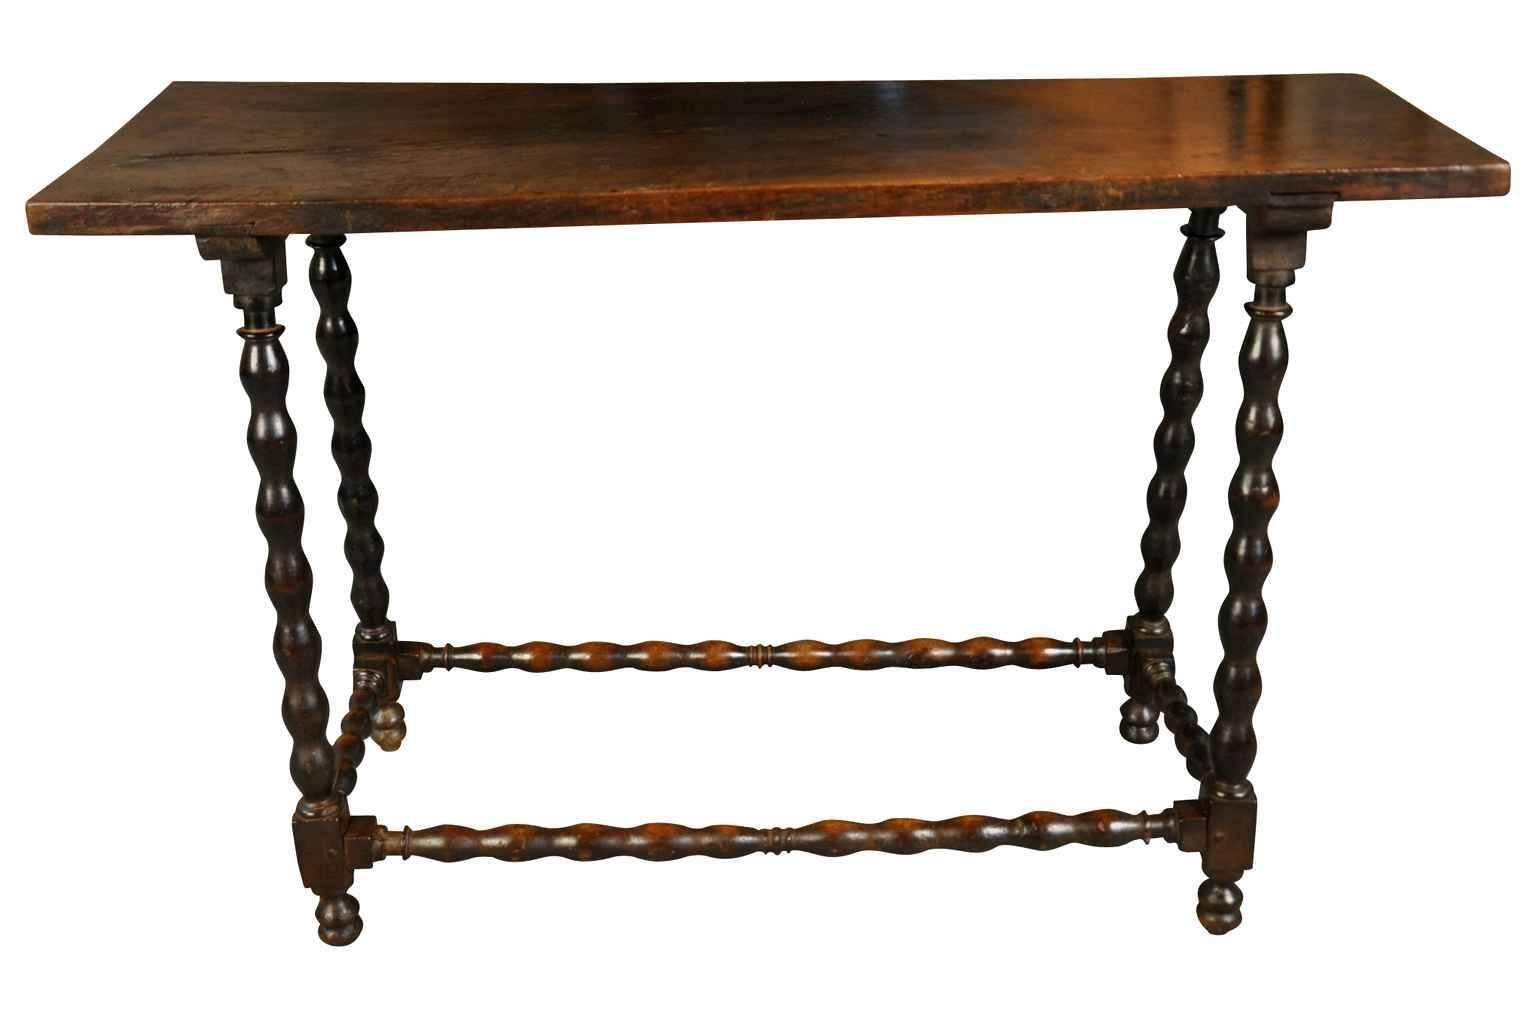 A very lovely Spanish 18th century console table. Beautifully constructed from walnut with a solid board top and nicely turned legs and stretchers. Wonderful patina and graining. A perfect sofa table!